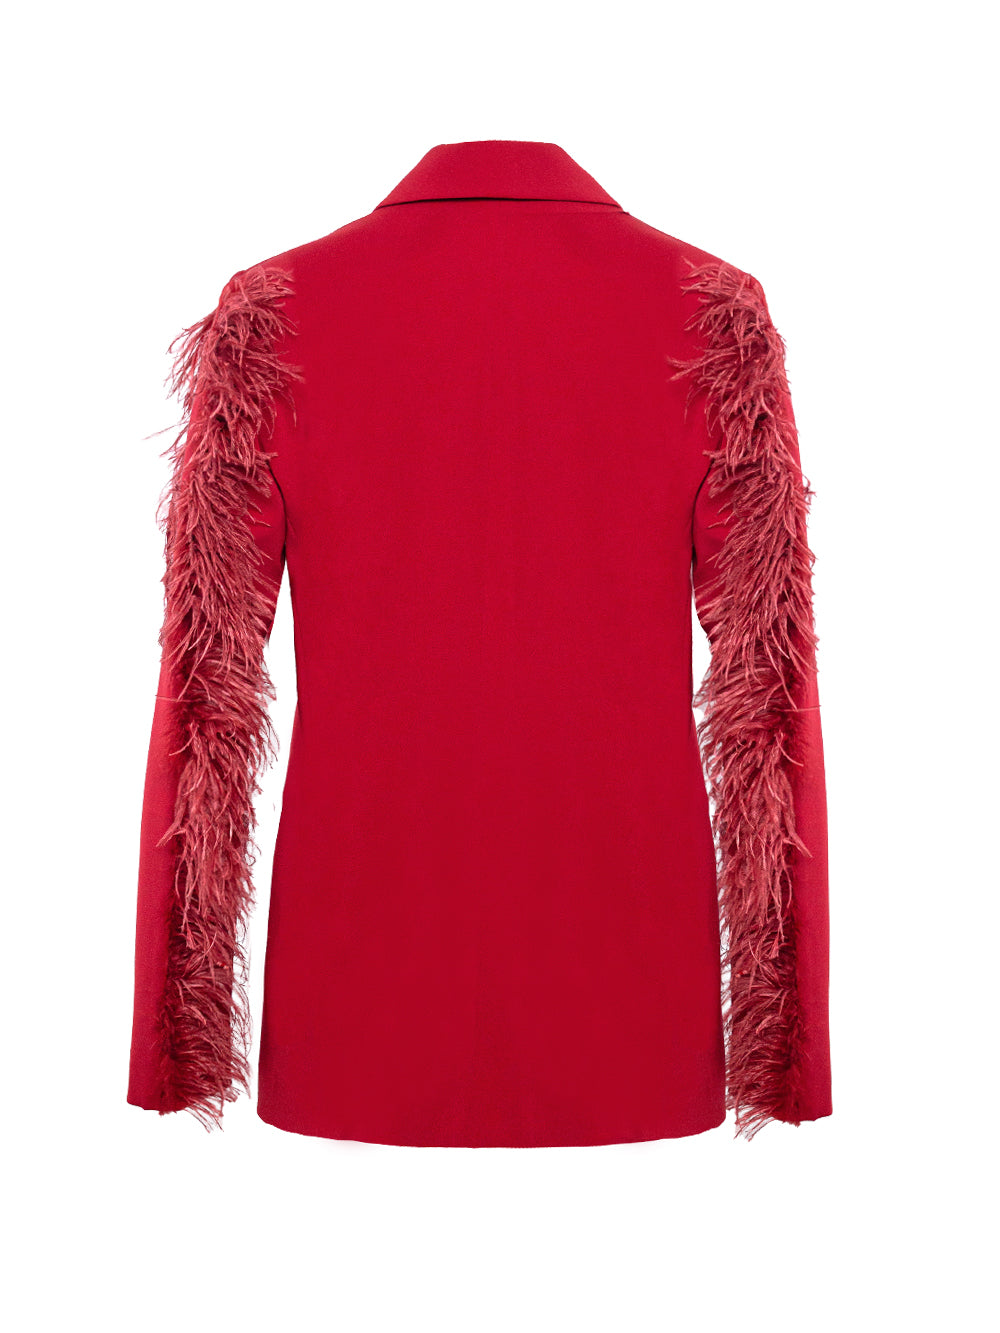 PATRIZIA PEPE FEATHER-DETAILING DOUBLE-BREASTED BLAZER